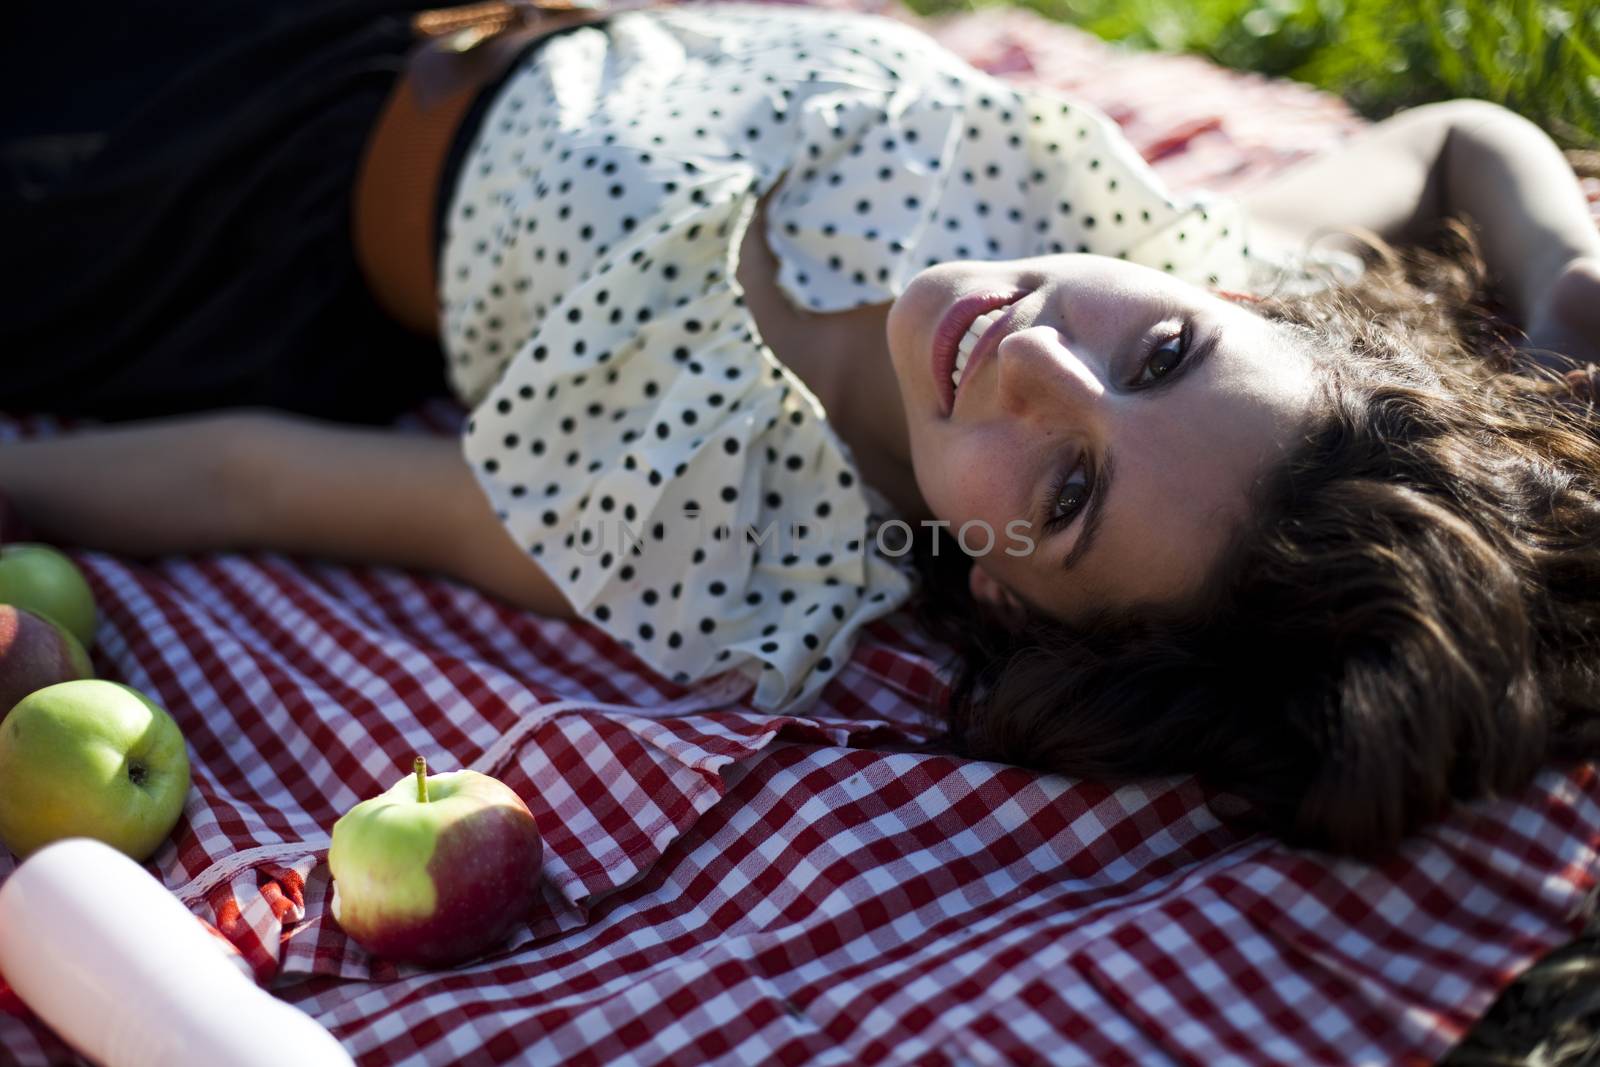 Picnic, summer free time spending by JanPietruszka